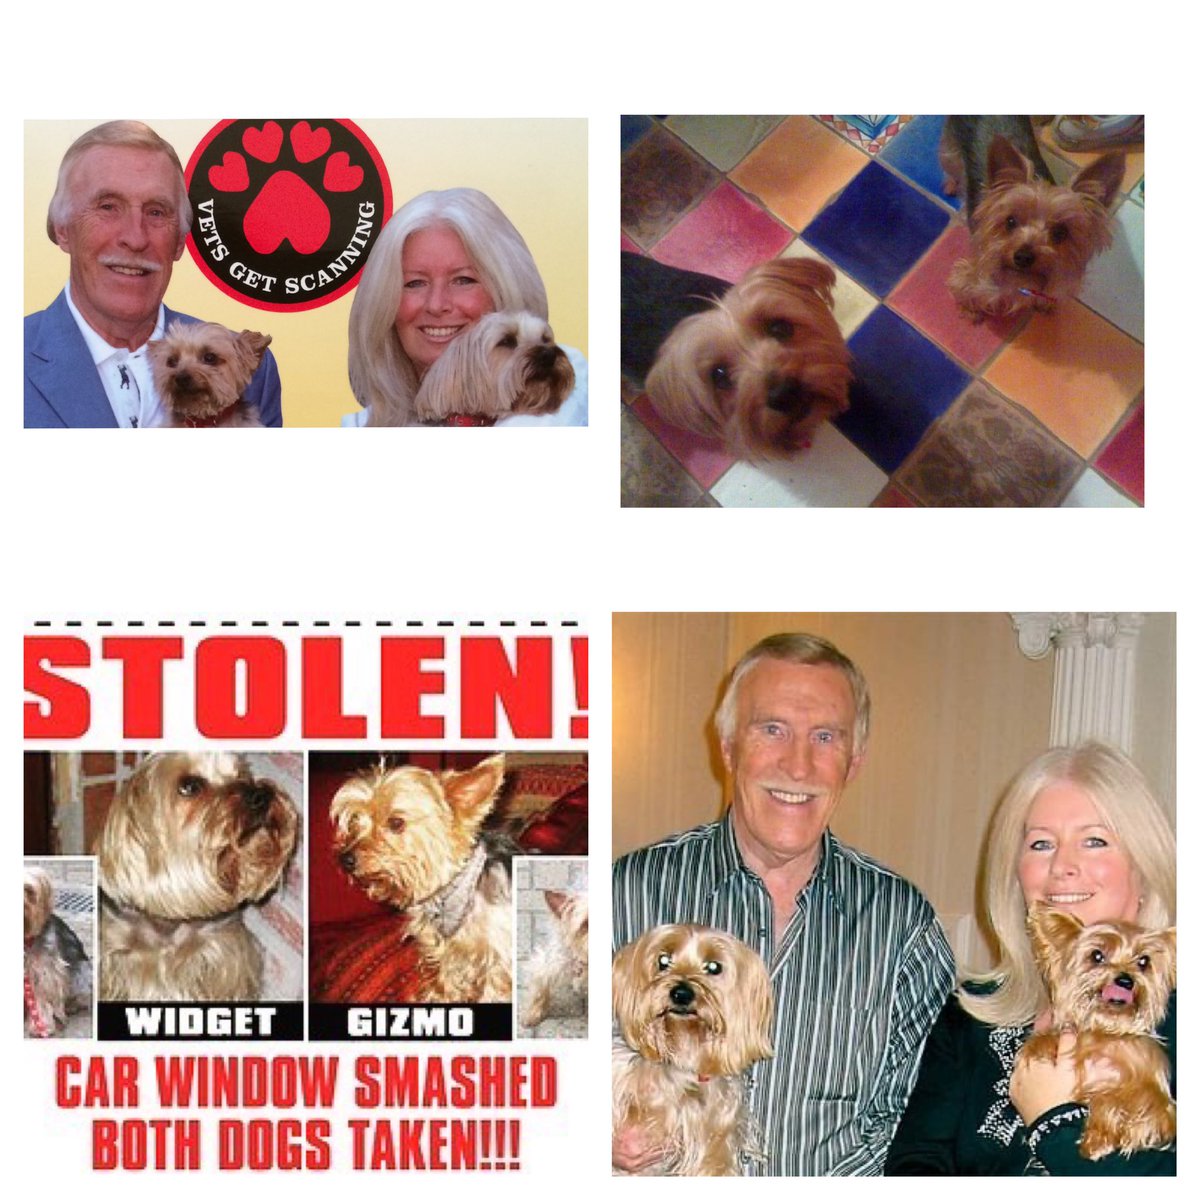 @SAMPAuk_ @UKHouseofLords @Anna_Firth @Dr_Dan_1 @theFOALGroup @pettheftaware @CatsProtection @DogLost_UK @MissingPetsGB @Find_Roxy @HunnyJax @rosieDoc2 @WaterhousePat @millypod1 @CatsMissing @sar_dogs @findmurphyhusky Congratulations to all 🐾❤️🐾🙏🏻 18 years ago I was reunited with my #Dogs thanks to my dad! Who would have thought a #petabduction law would come before making it compulsory to check microchip registration at veterinary first treatment 2 reunite pets 😢 #MakeChipsCount #FernsLaw